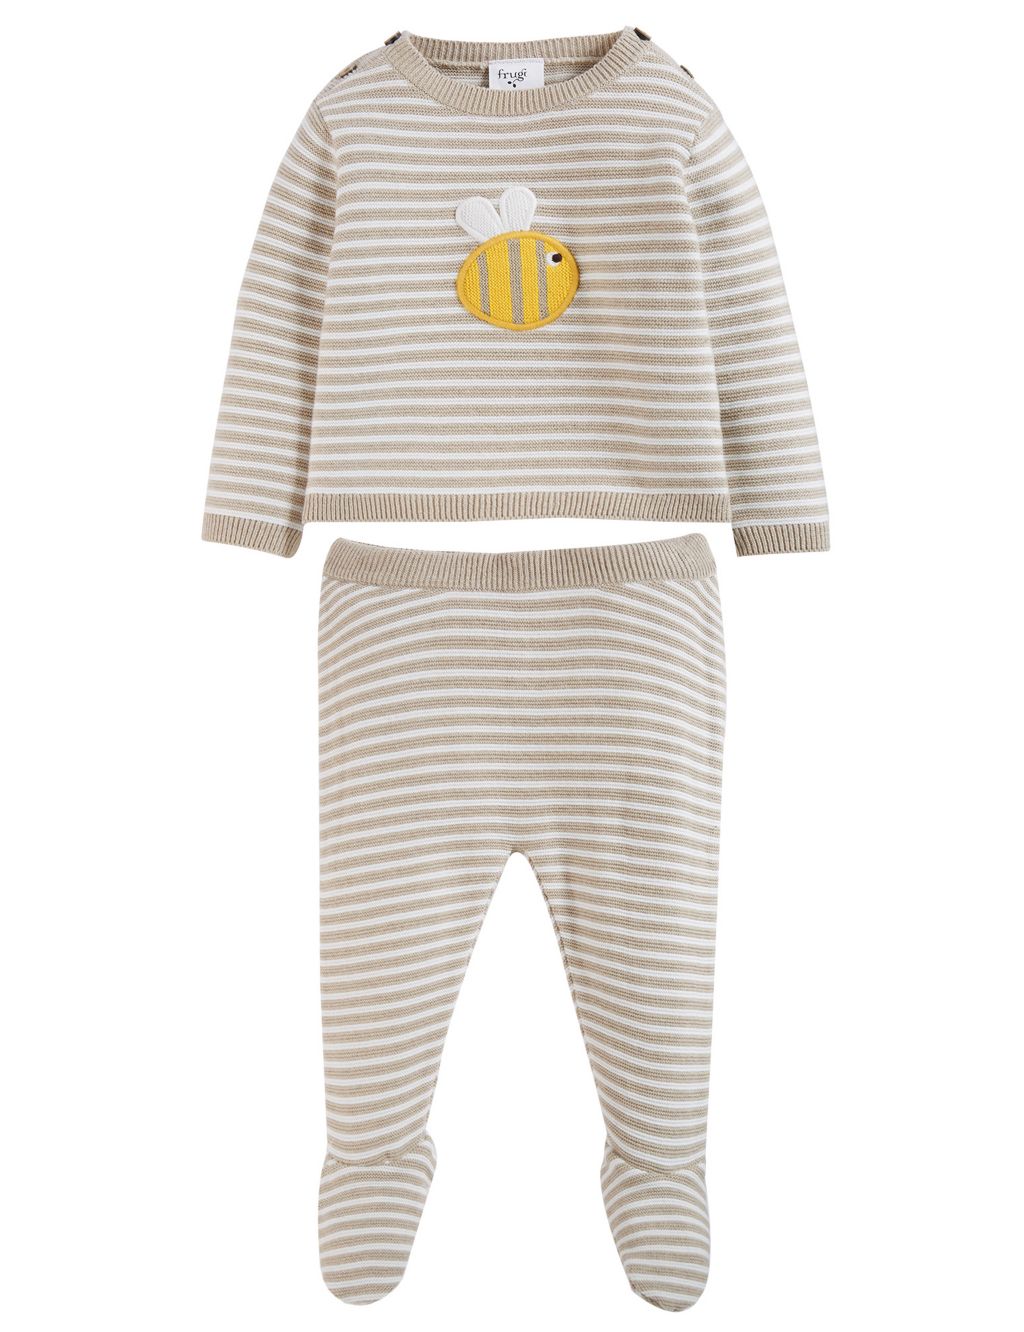 2pc Organic Cotton Striped Knitted Outfit (7lbs-4 Yrs)